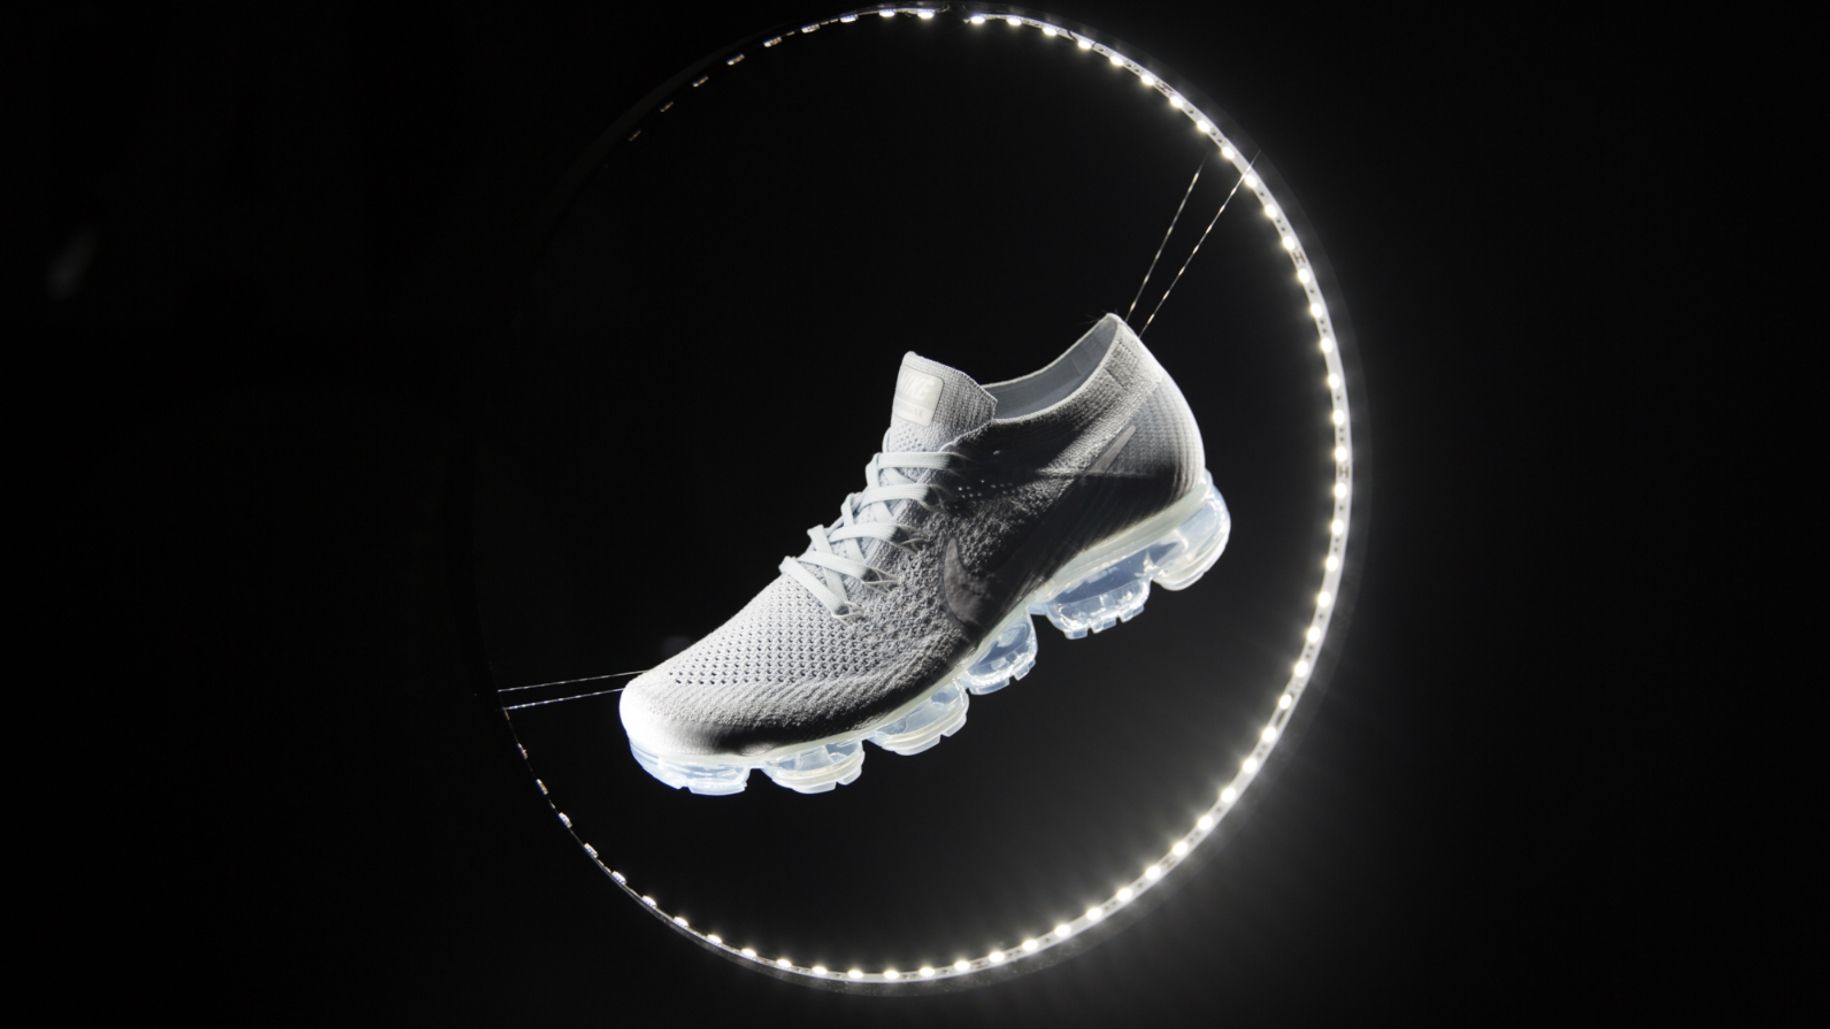 Nike air vapor max against black background. a crescent of dots of light surround right side of shoe